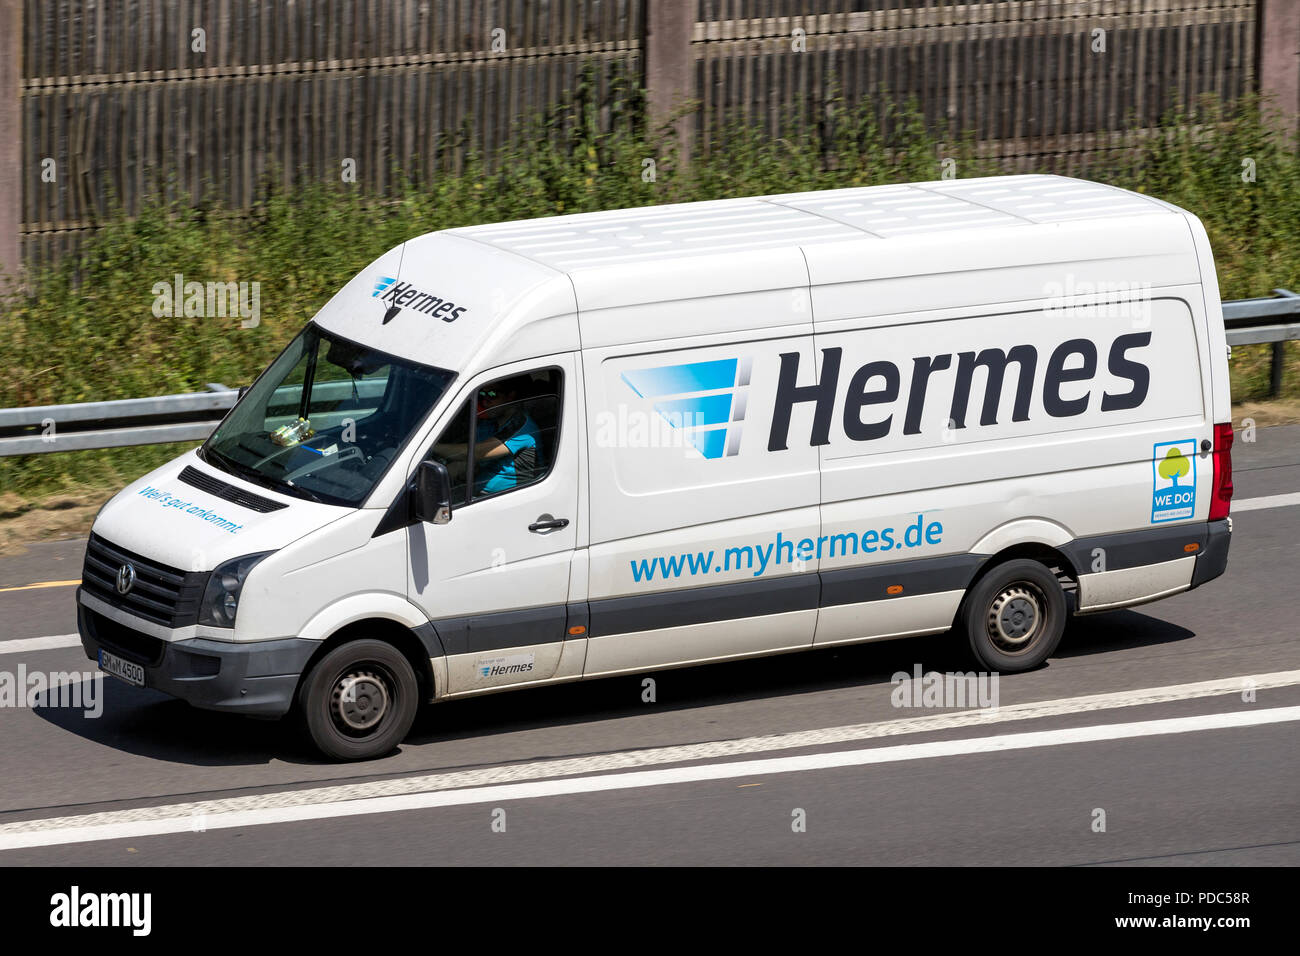 Hermes delivery van on motorway. Hermes is Germany’s largest post-independent provider of deliveries to private customers. Stock Photo